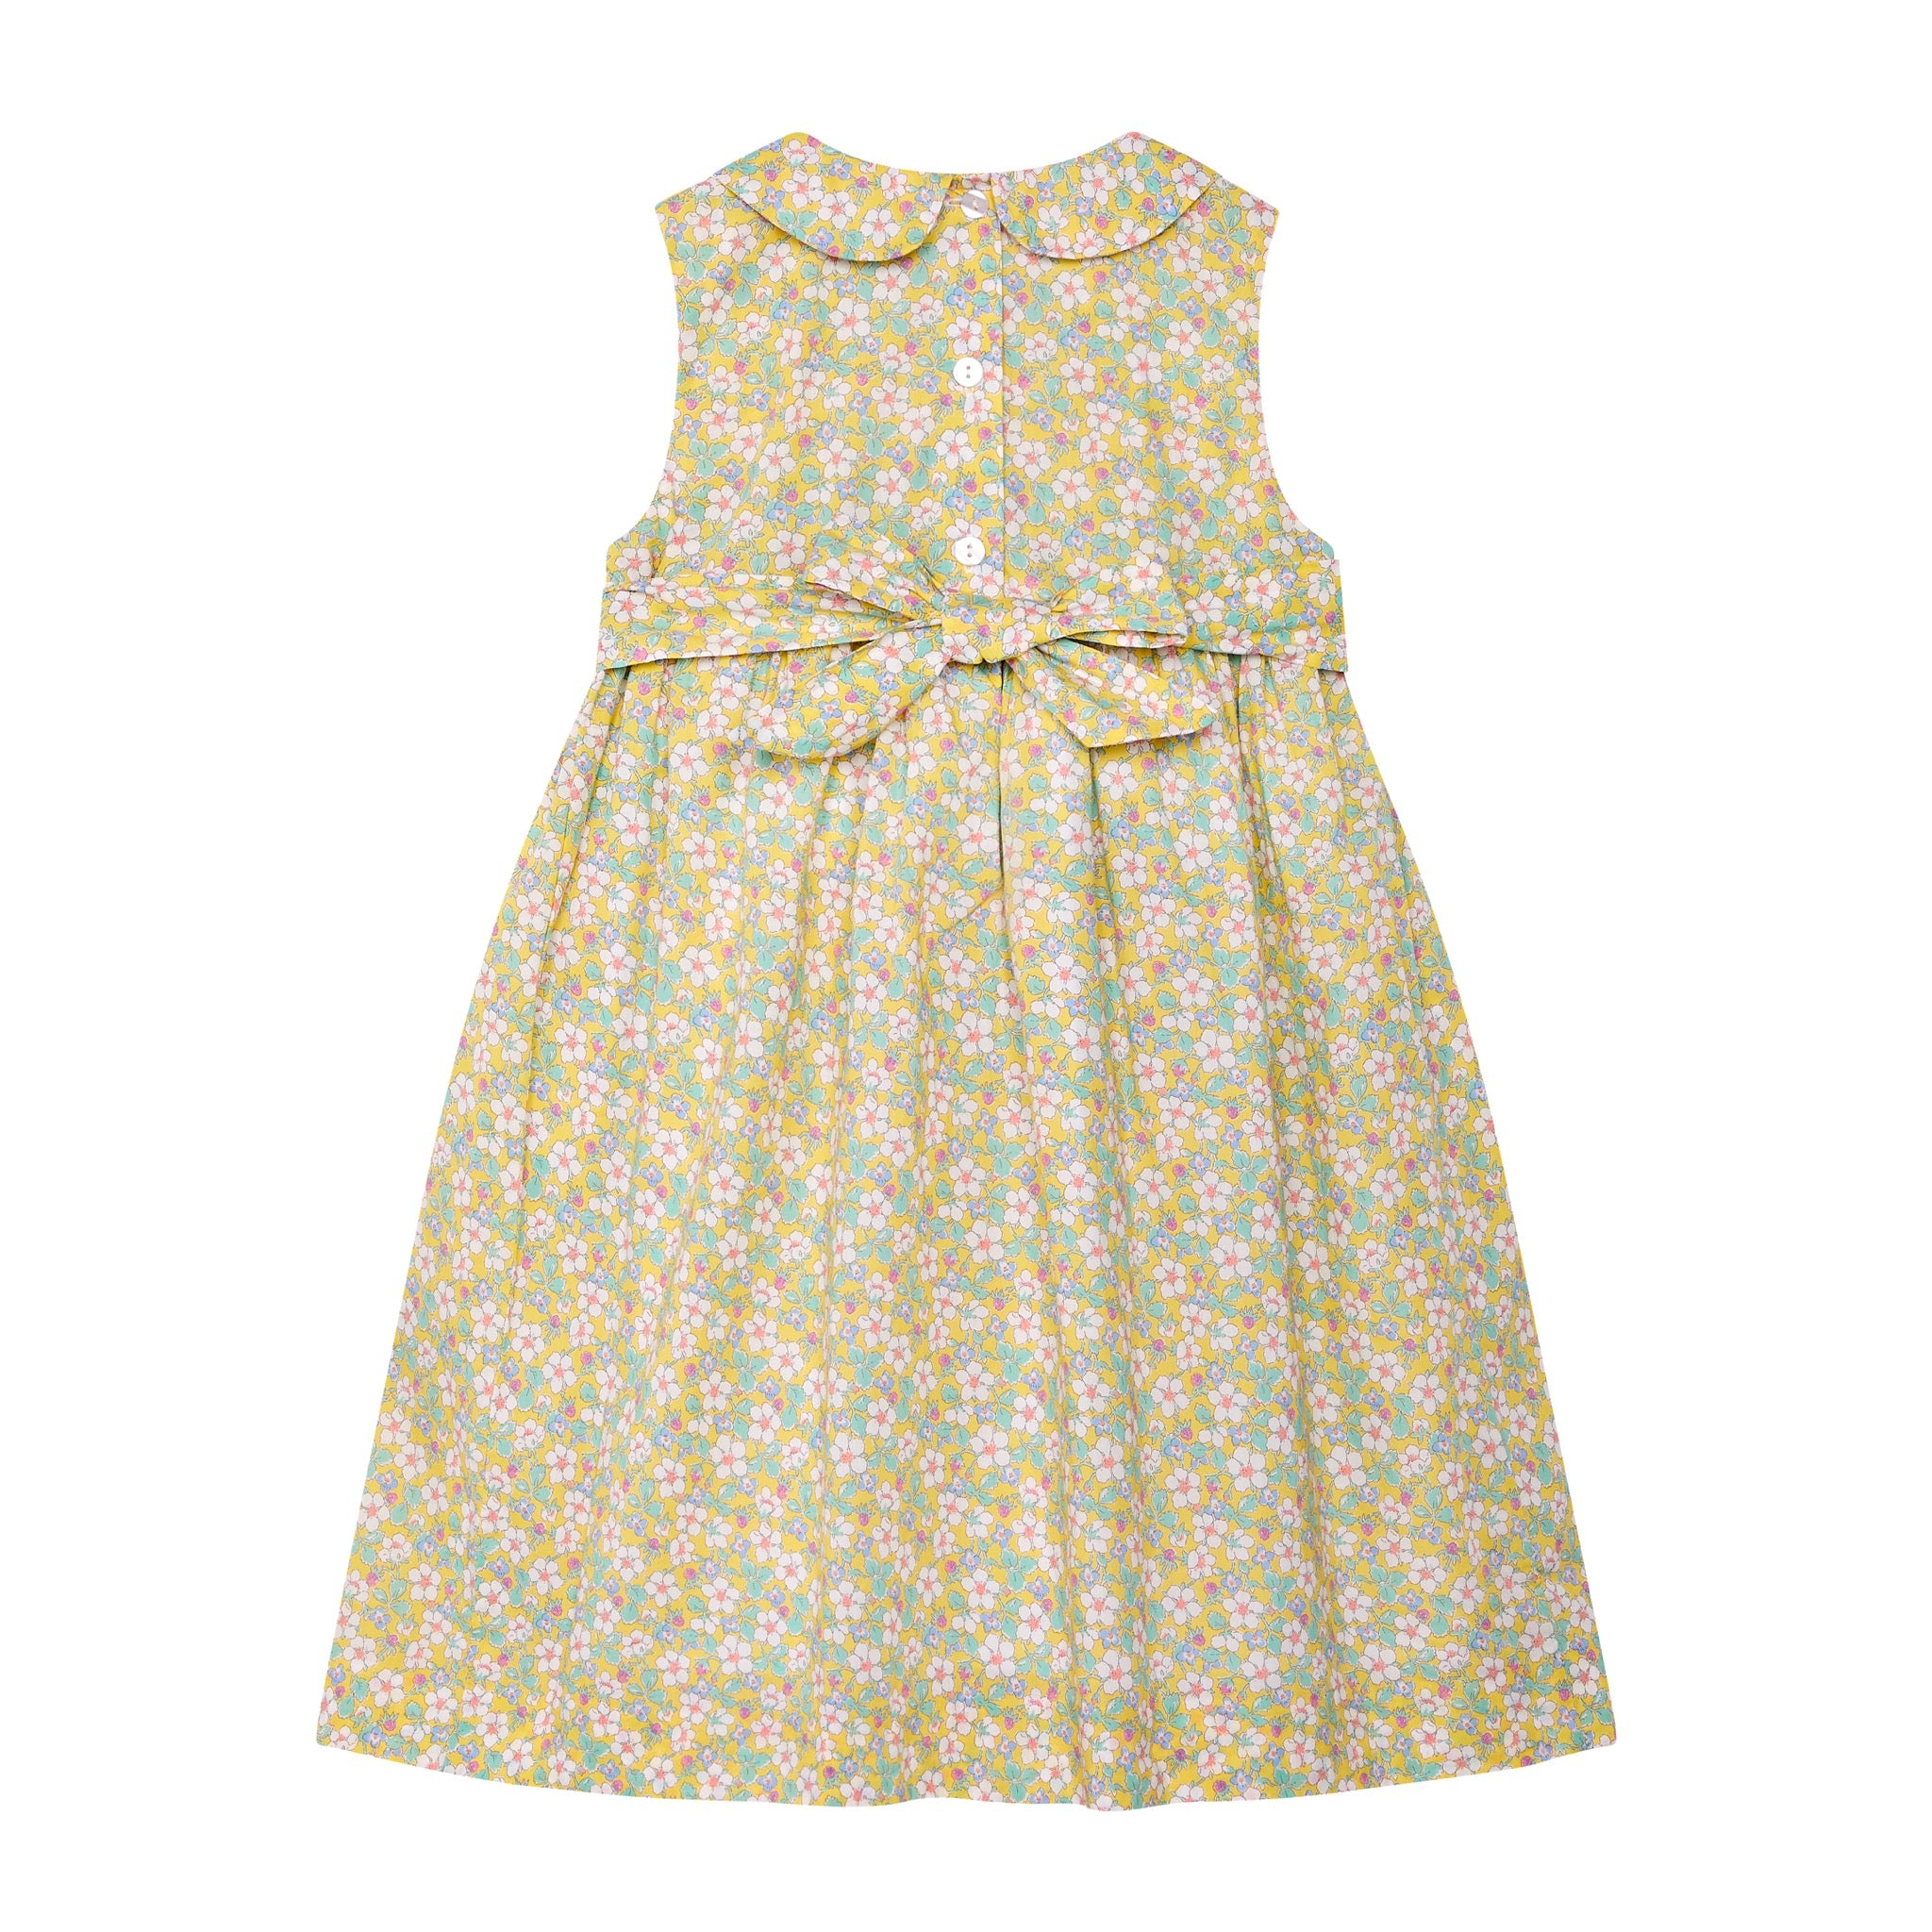 Made With Liberty Fabric: Girls Dress - Ruthie